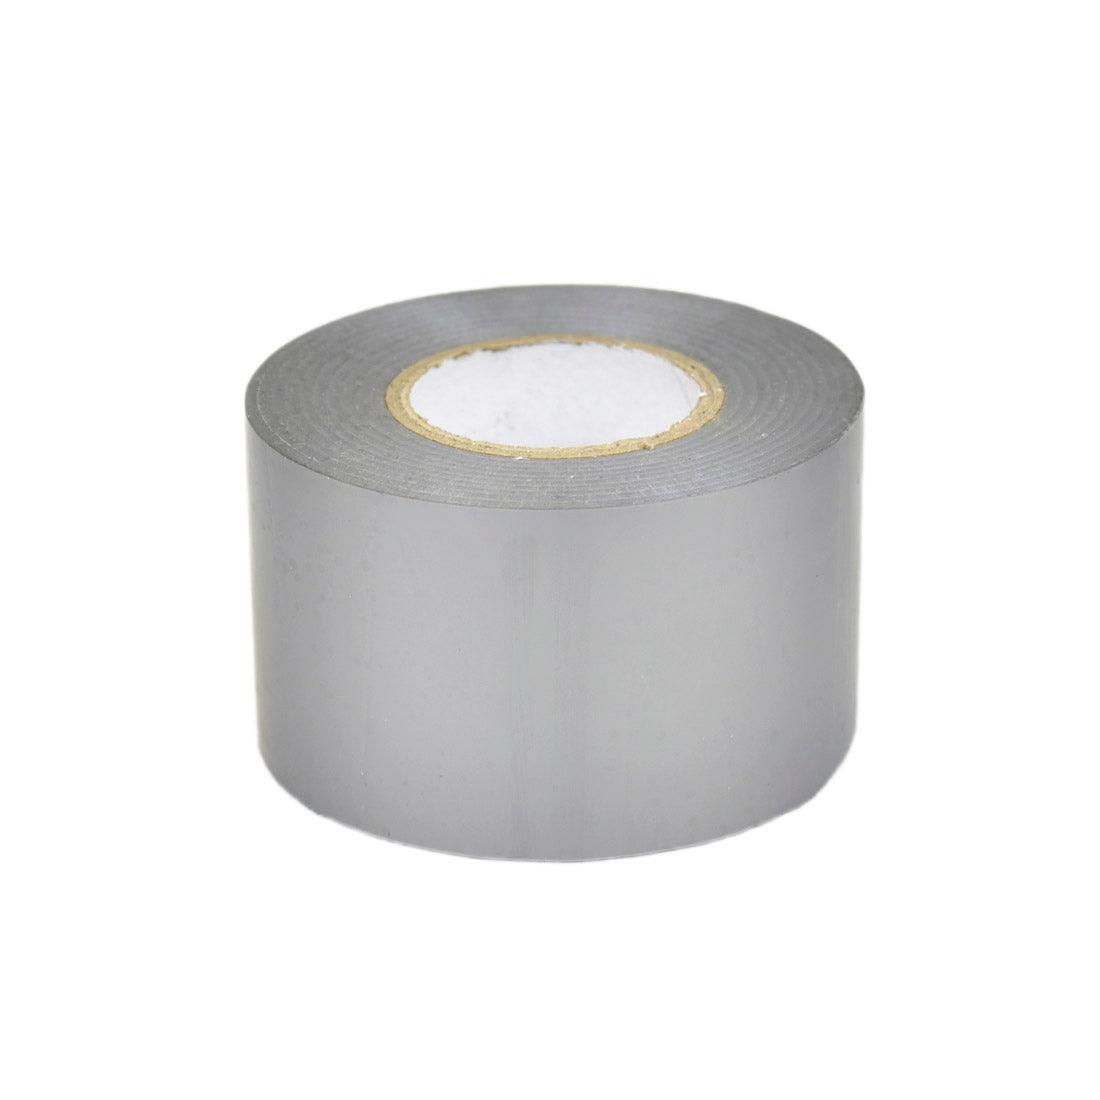 PVC Duct Tape 48mm x 30m 0.13mm Silver